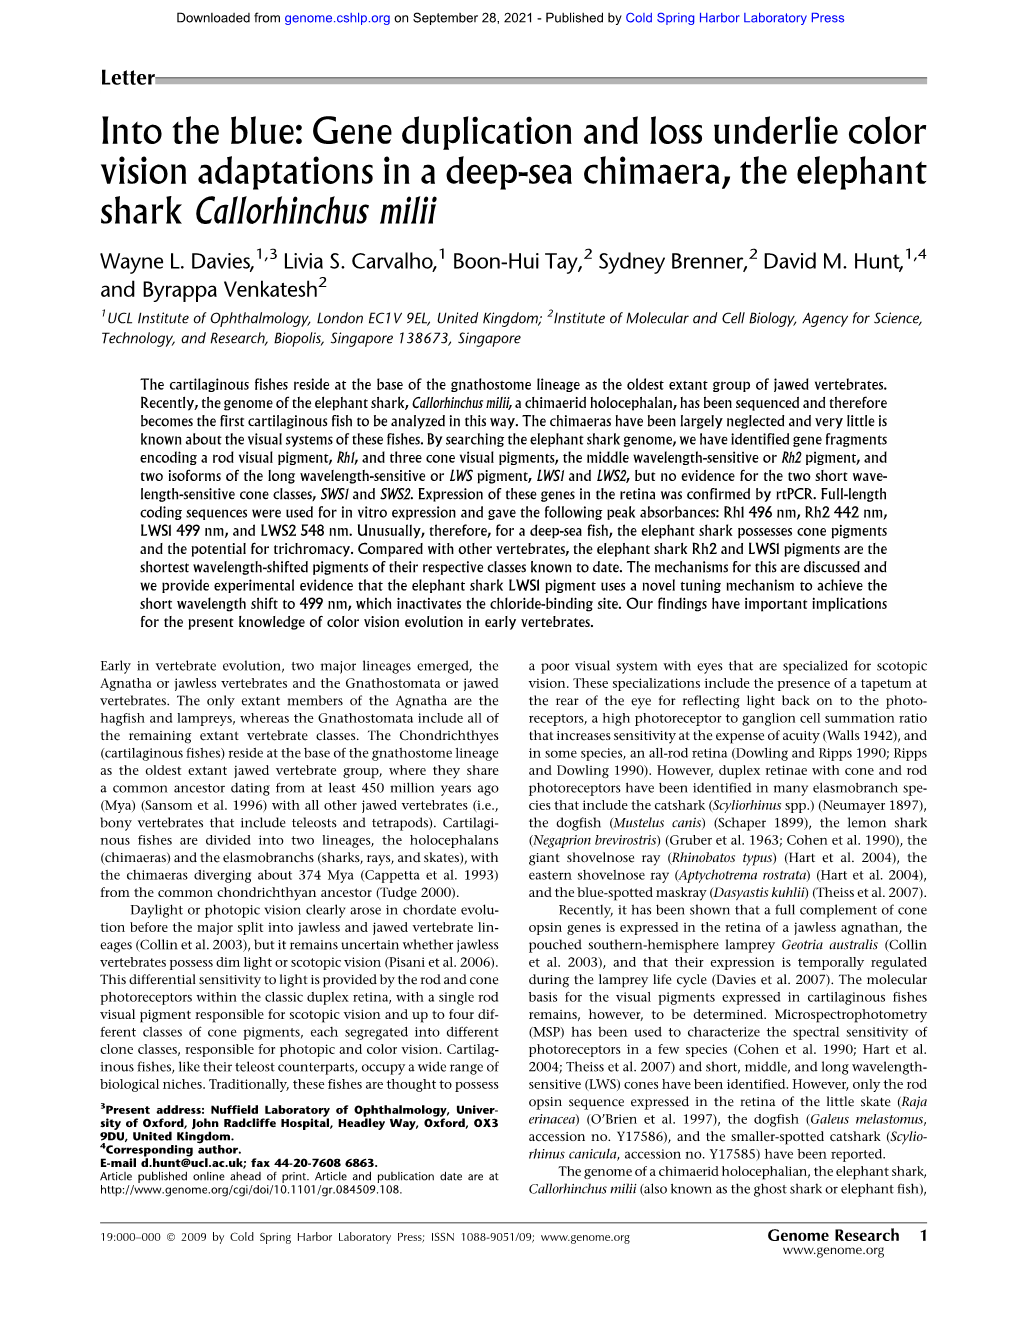 Into the Blue: Gene Duplication and Loss Underlie Color Vision Adaptations in a Deep-Sea Chimaera, the Elephant Shark Callorhinchus Milii